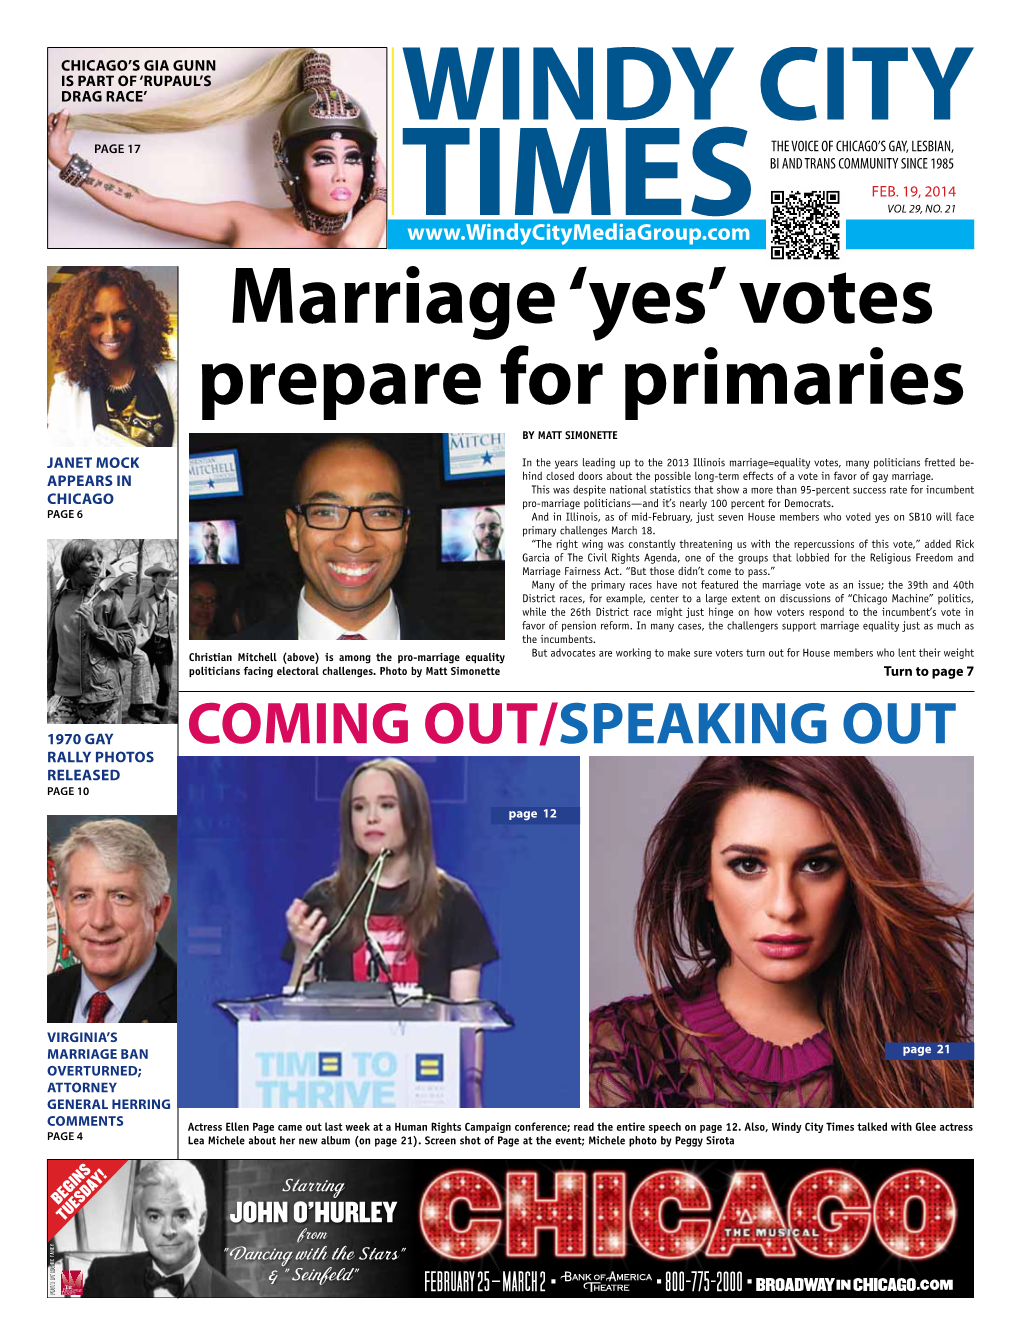 Marriage ‘Yes’ Votes Prepare for Primaries by Matt Simonette